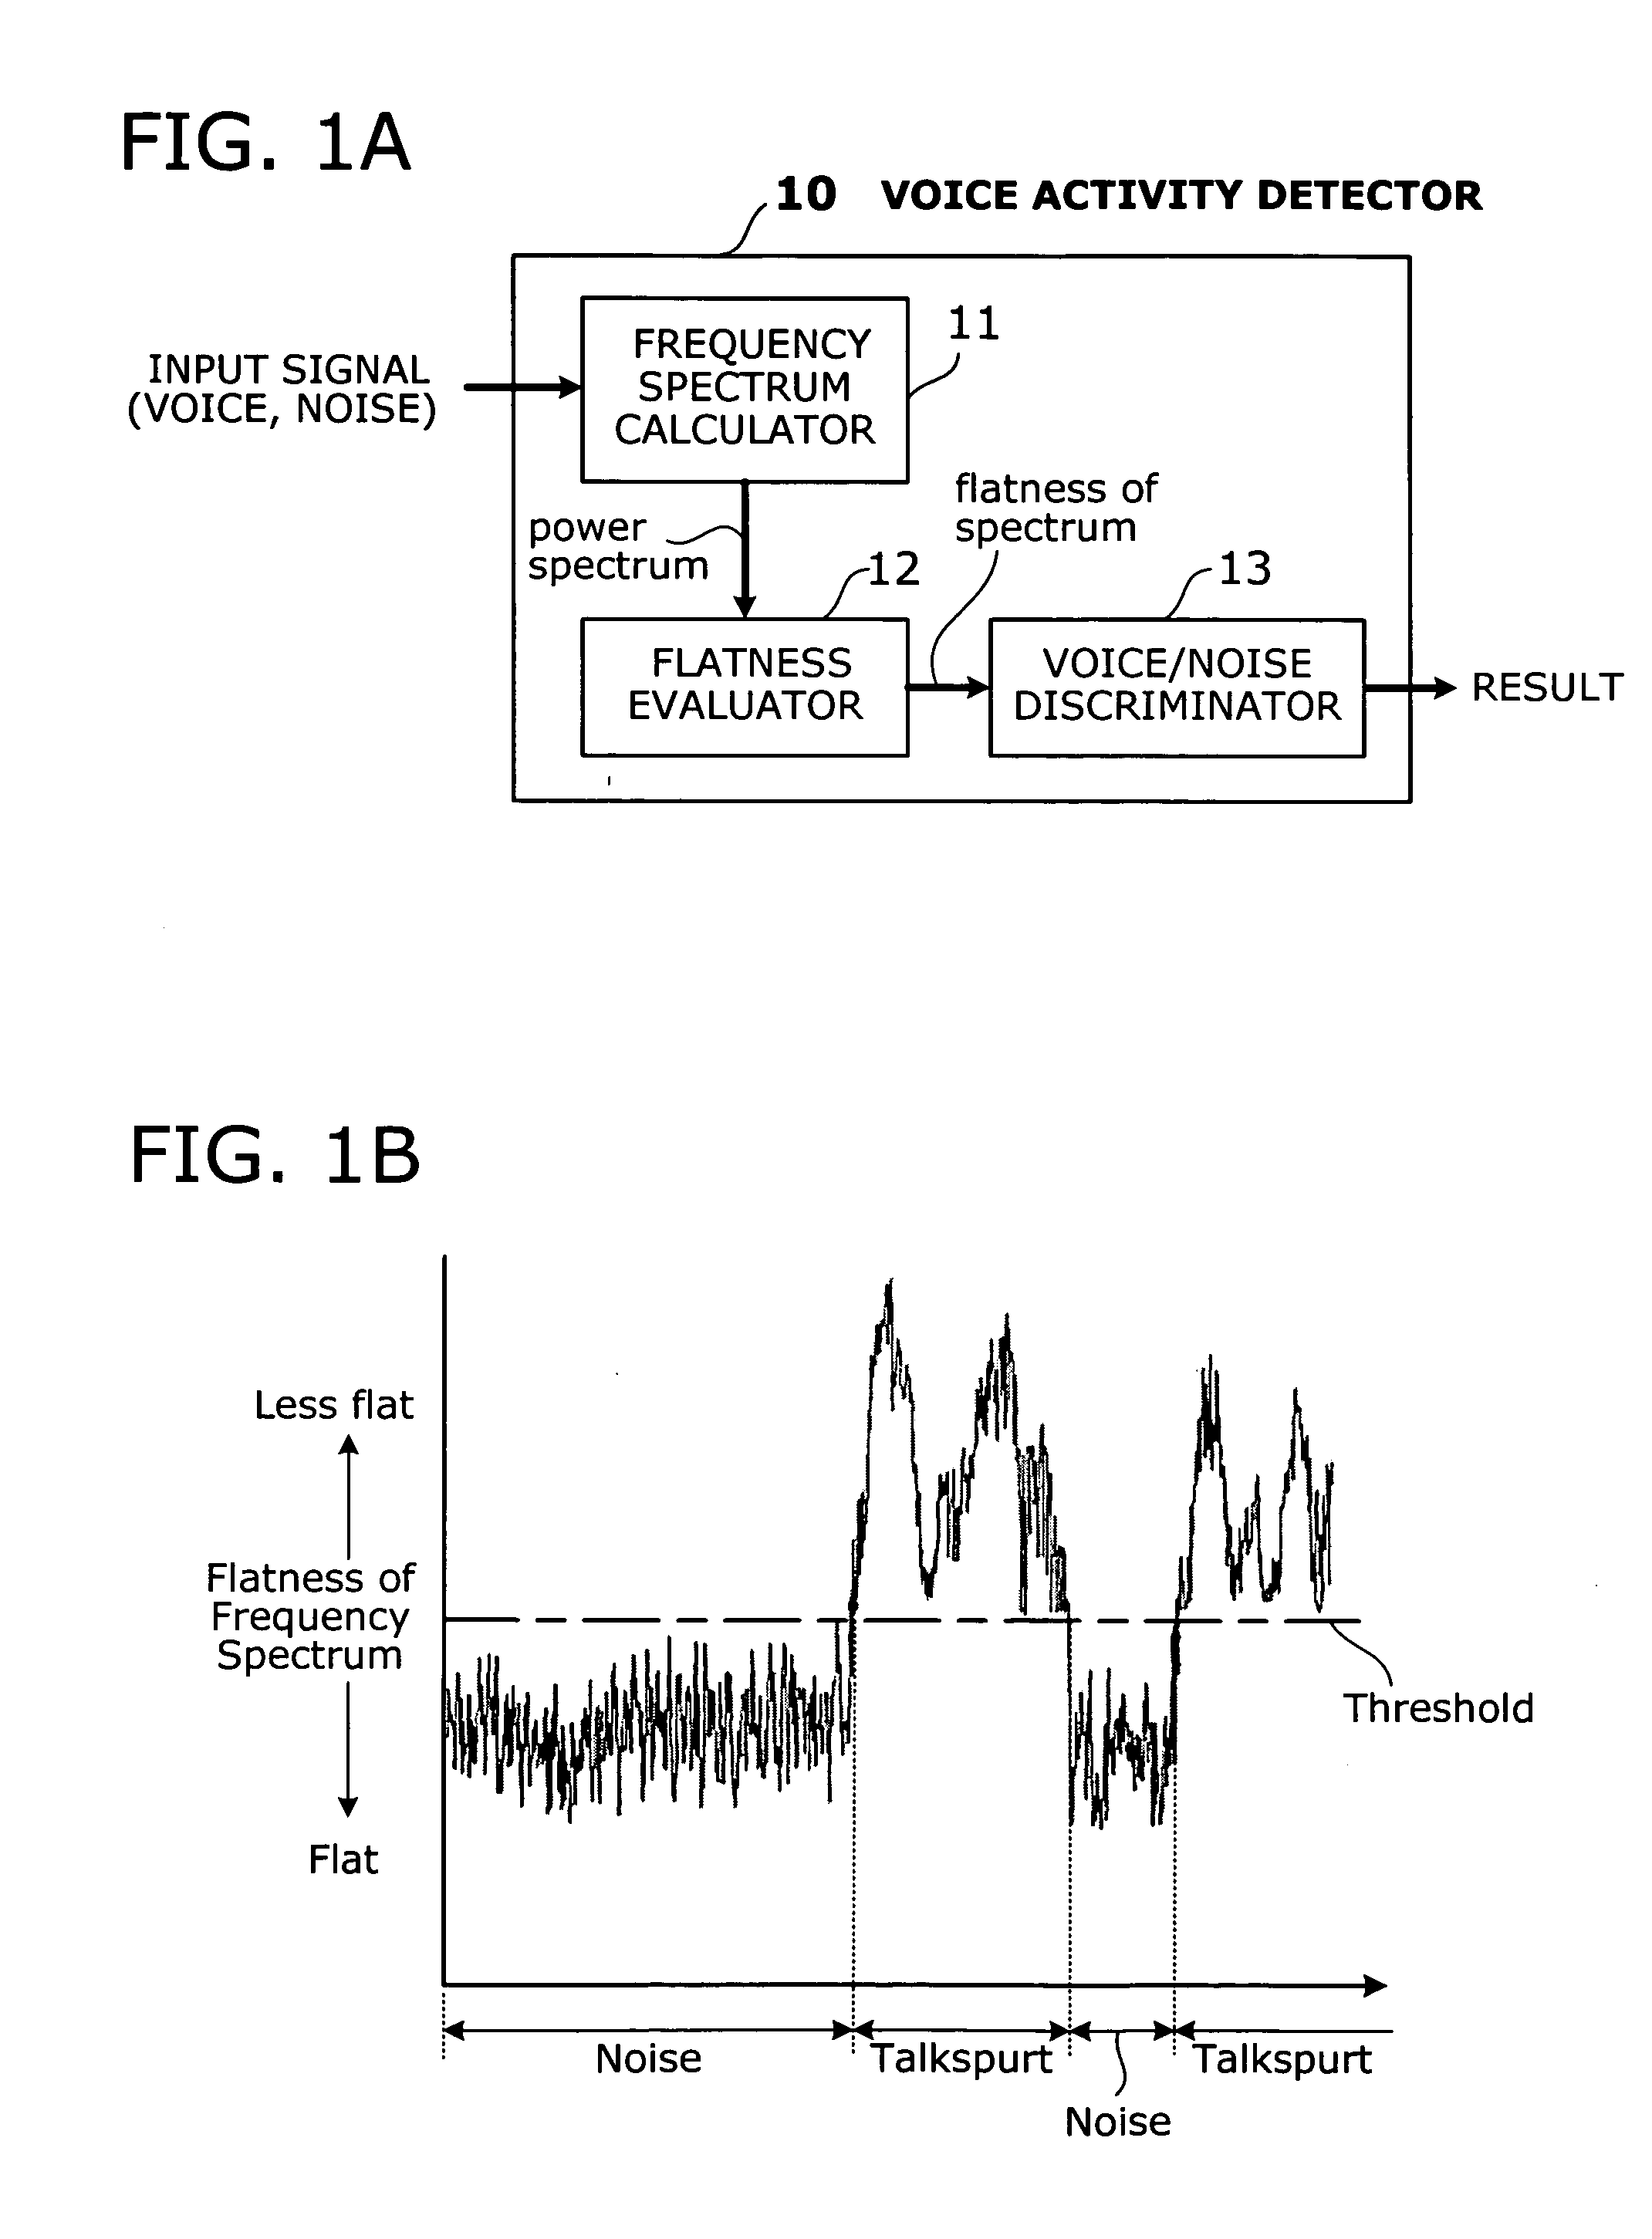 Voice activity detector based on spectral flatness of input signal